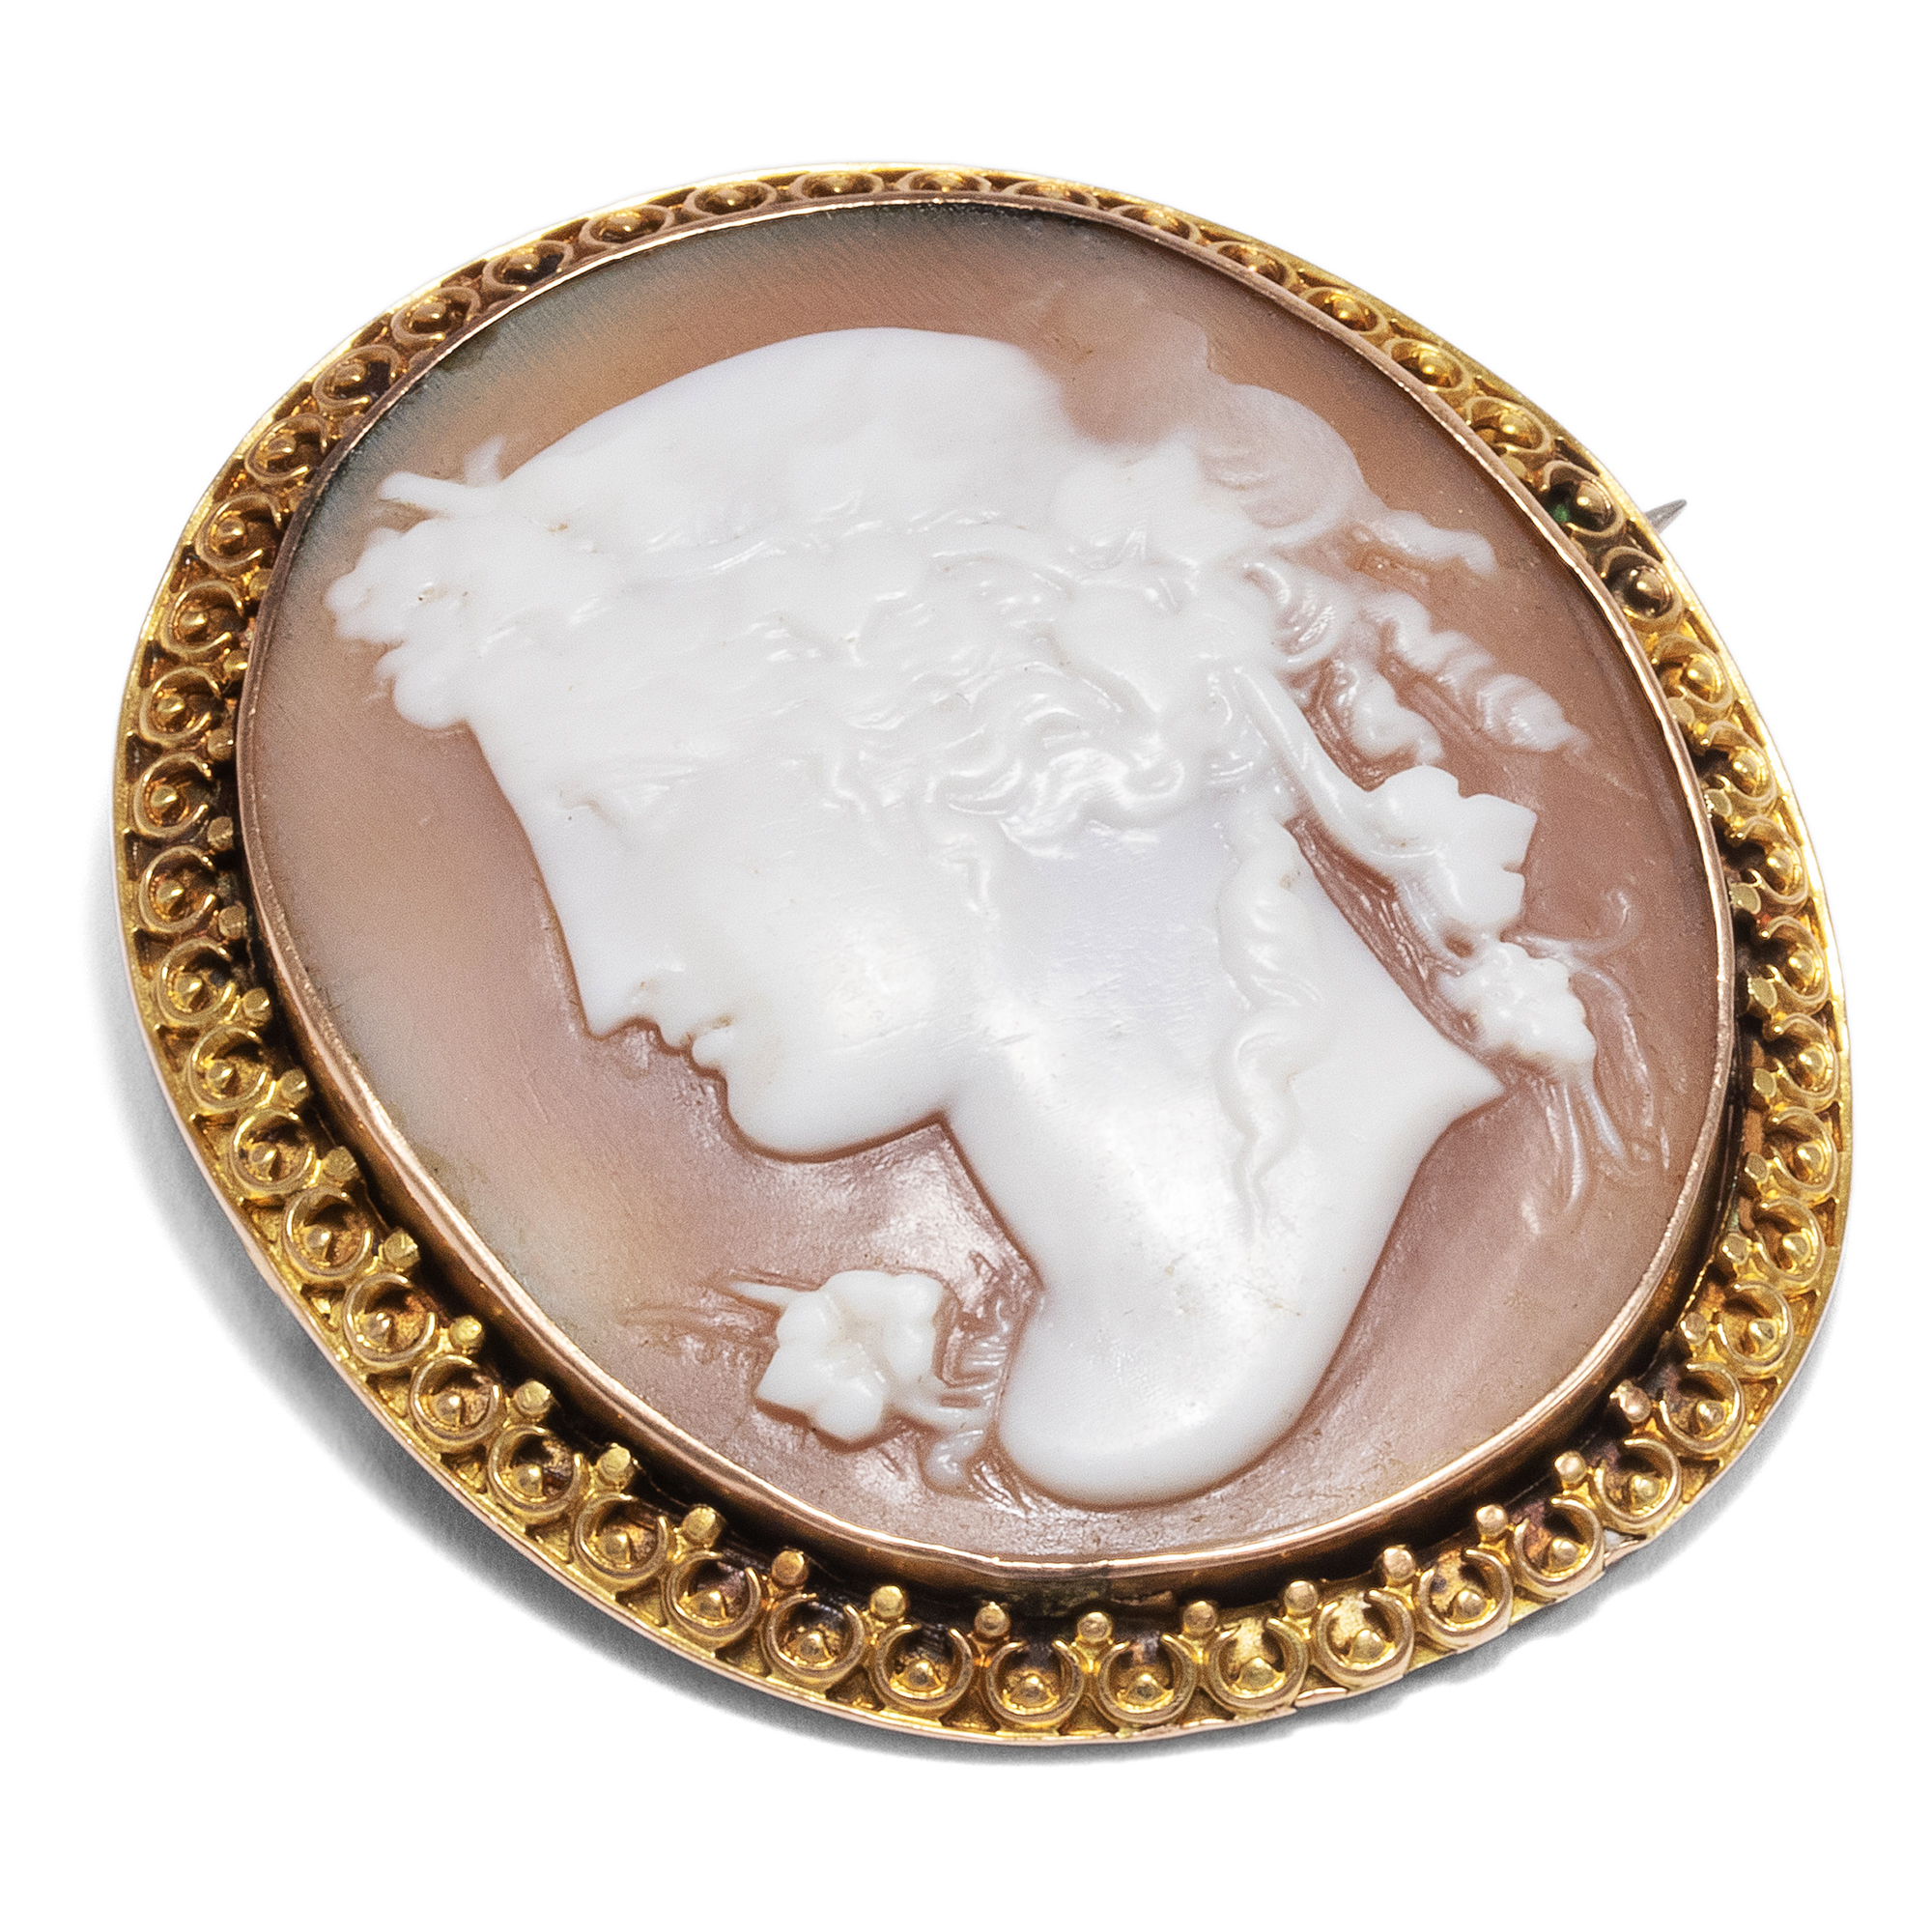 Antique Shell Cameo With Personification Of Fidelity In Gold Setting, Around 1870